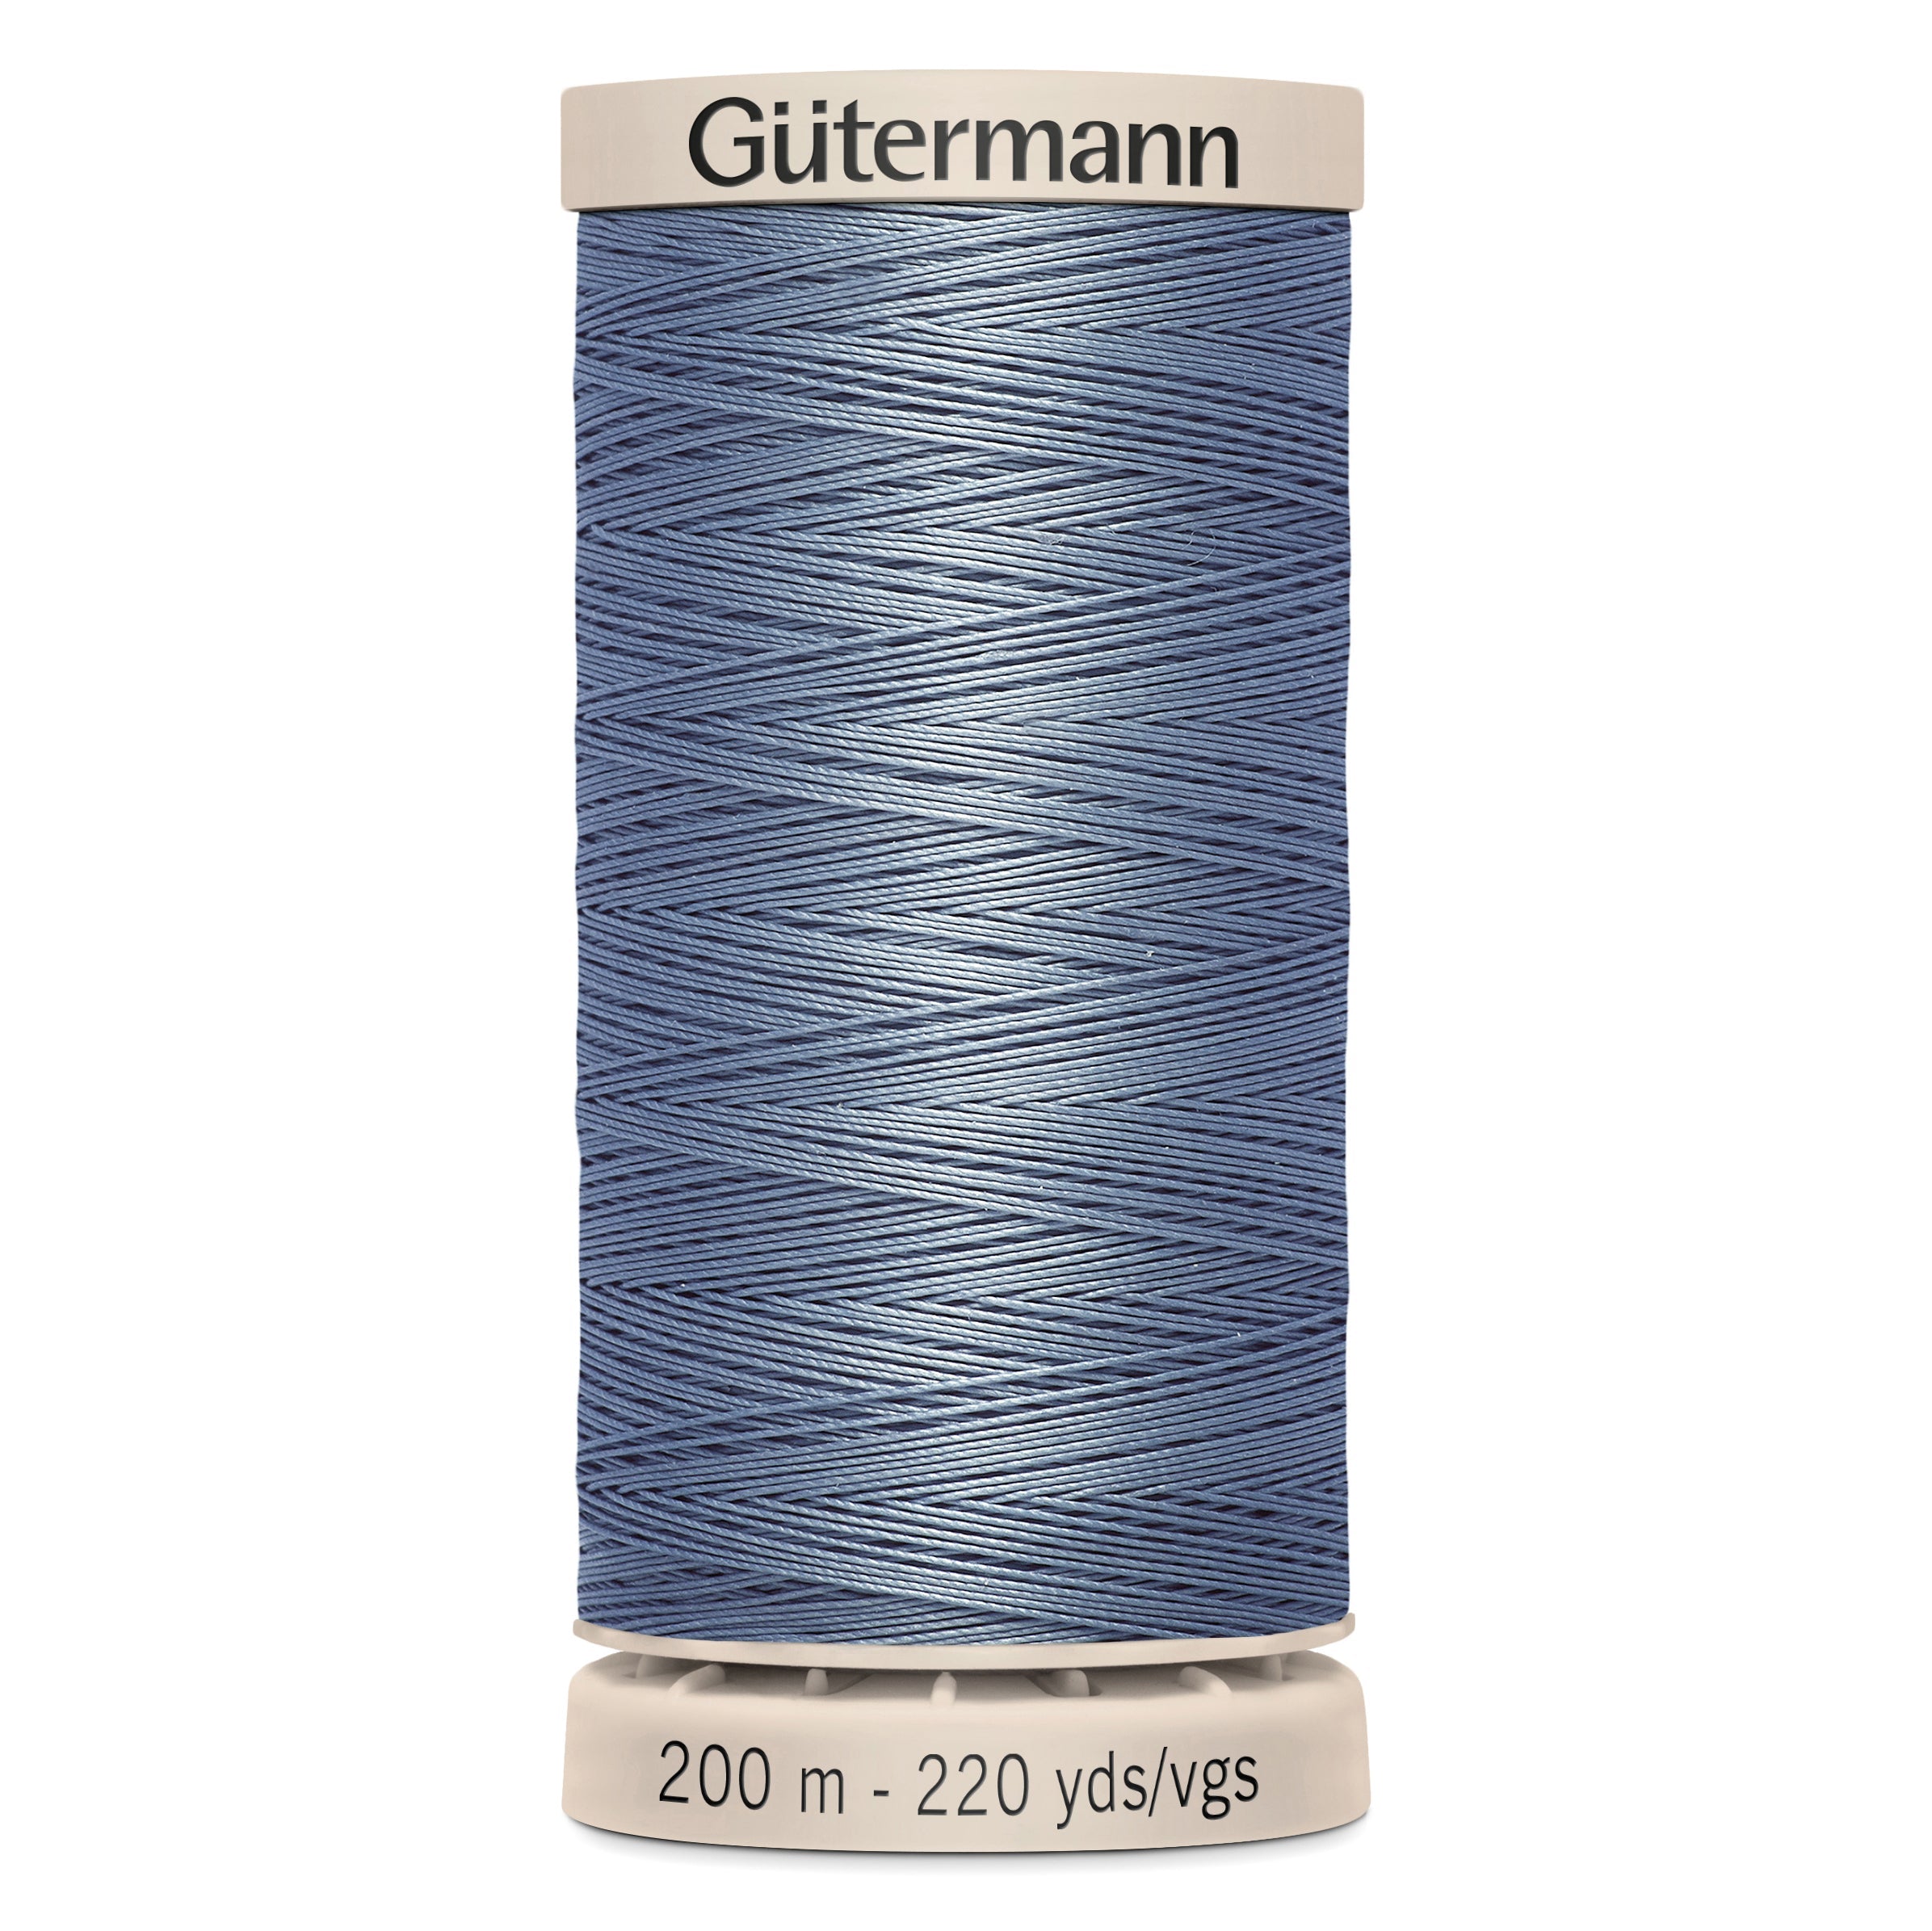 Gutermann Hand Quilting Cotton - 5815 from Jaycotts Sewing Supplies